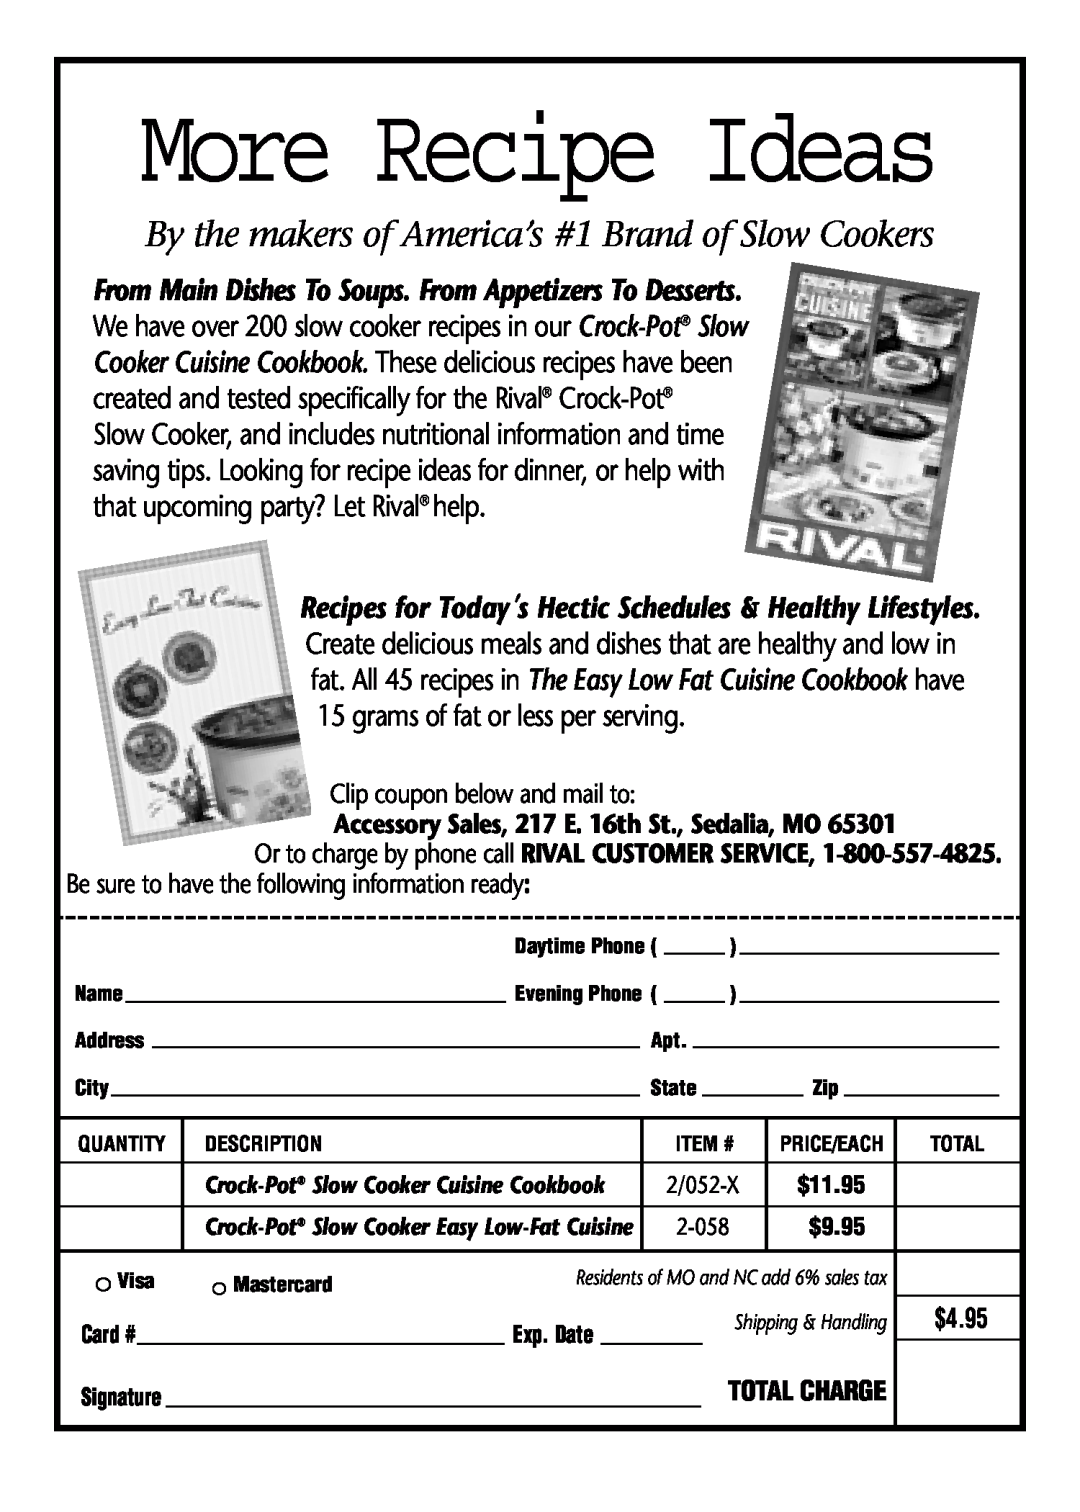 Rival 3164 More Recipe Ideas, Clip coupon below and mail to, Accessory Sales, 217 E. 16th St., Sedalia, MO, $4.95, $11.95 